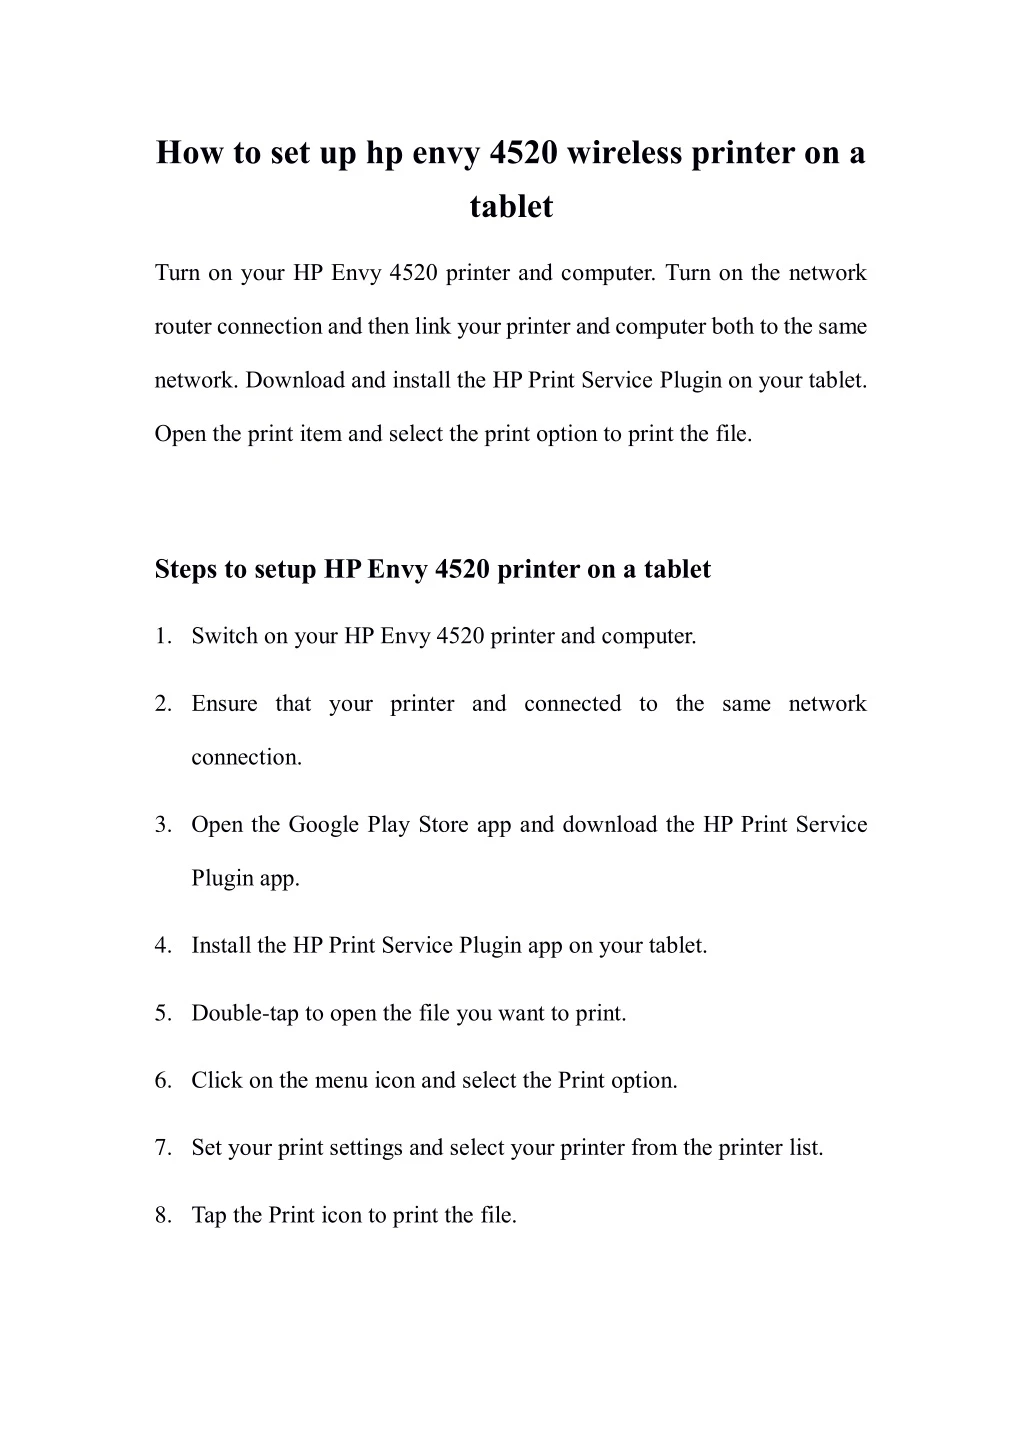 how to set up hp envy 4520 wireless printer